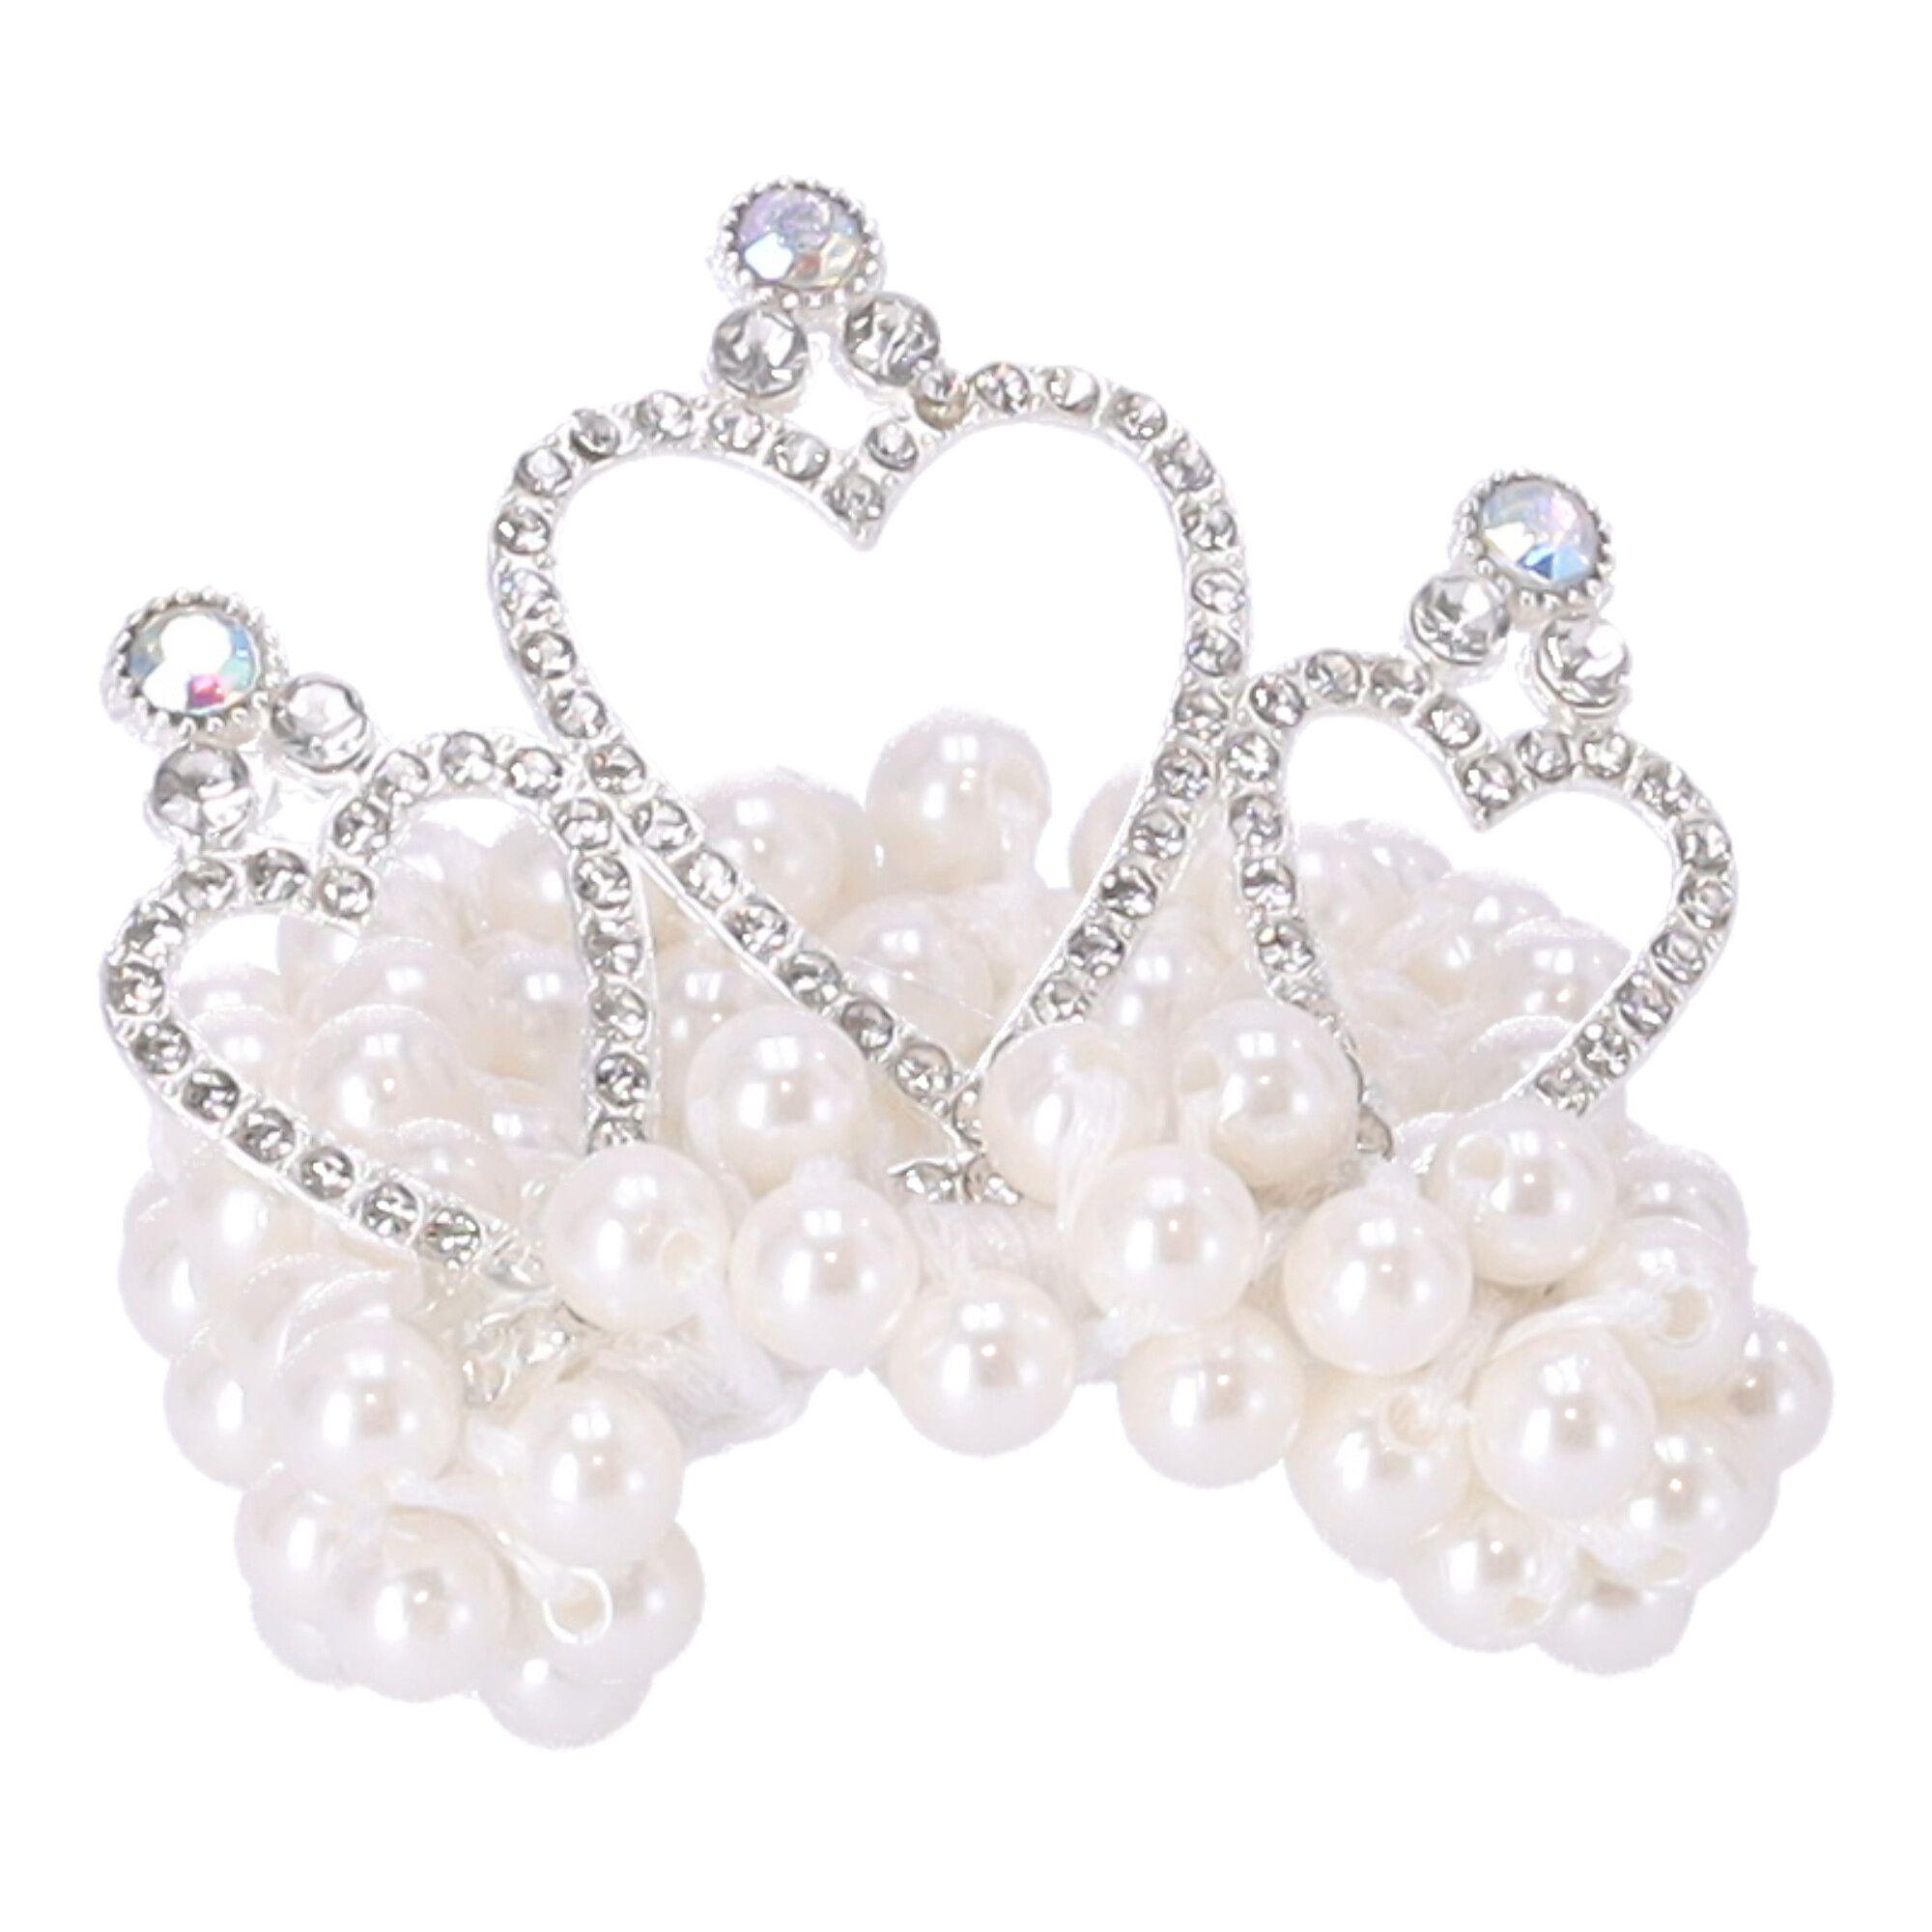 Decorative rubber band with pearls and crown - type 2